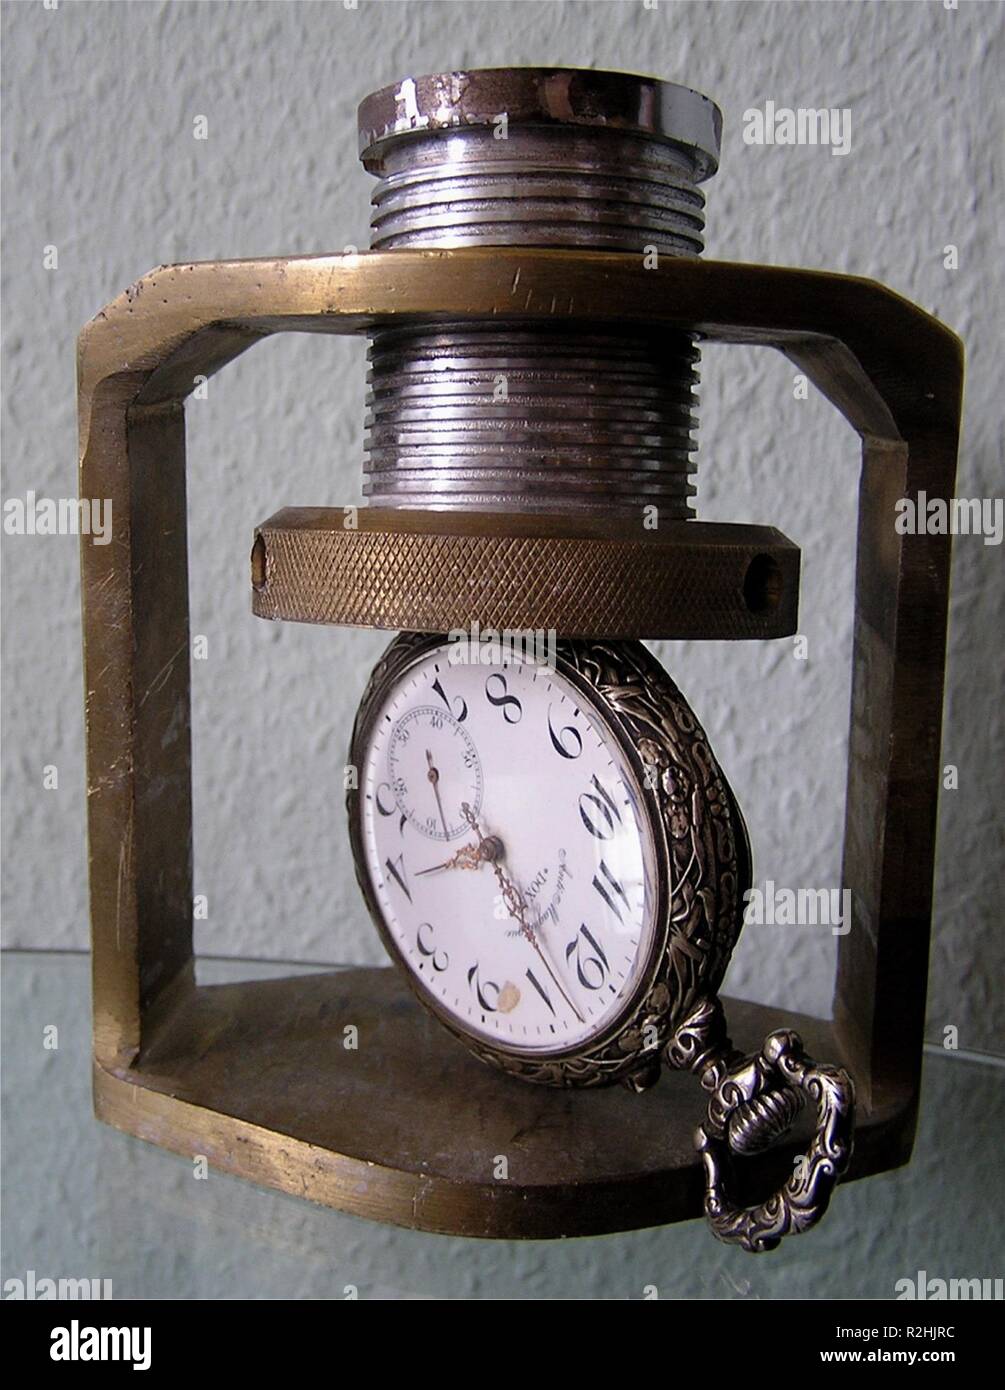 pressure of time Stock Photo